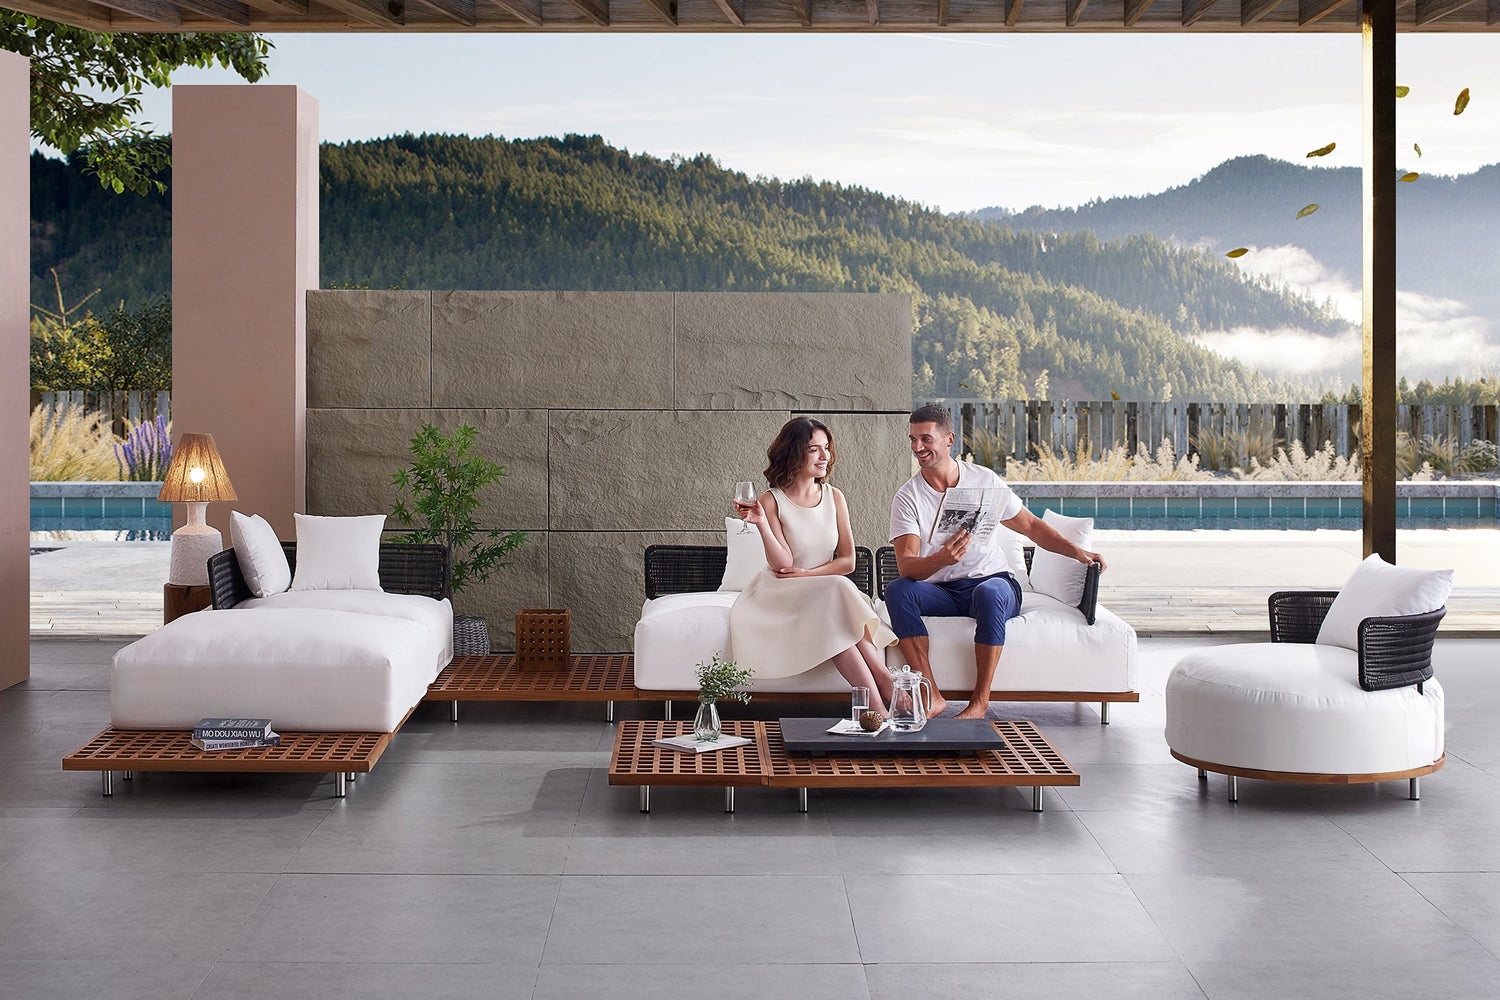 Tips To Creating an Outdoor Space With Modular Furniture